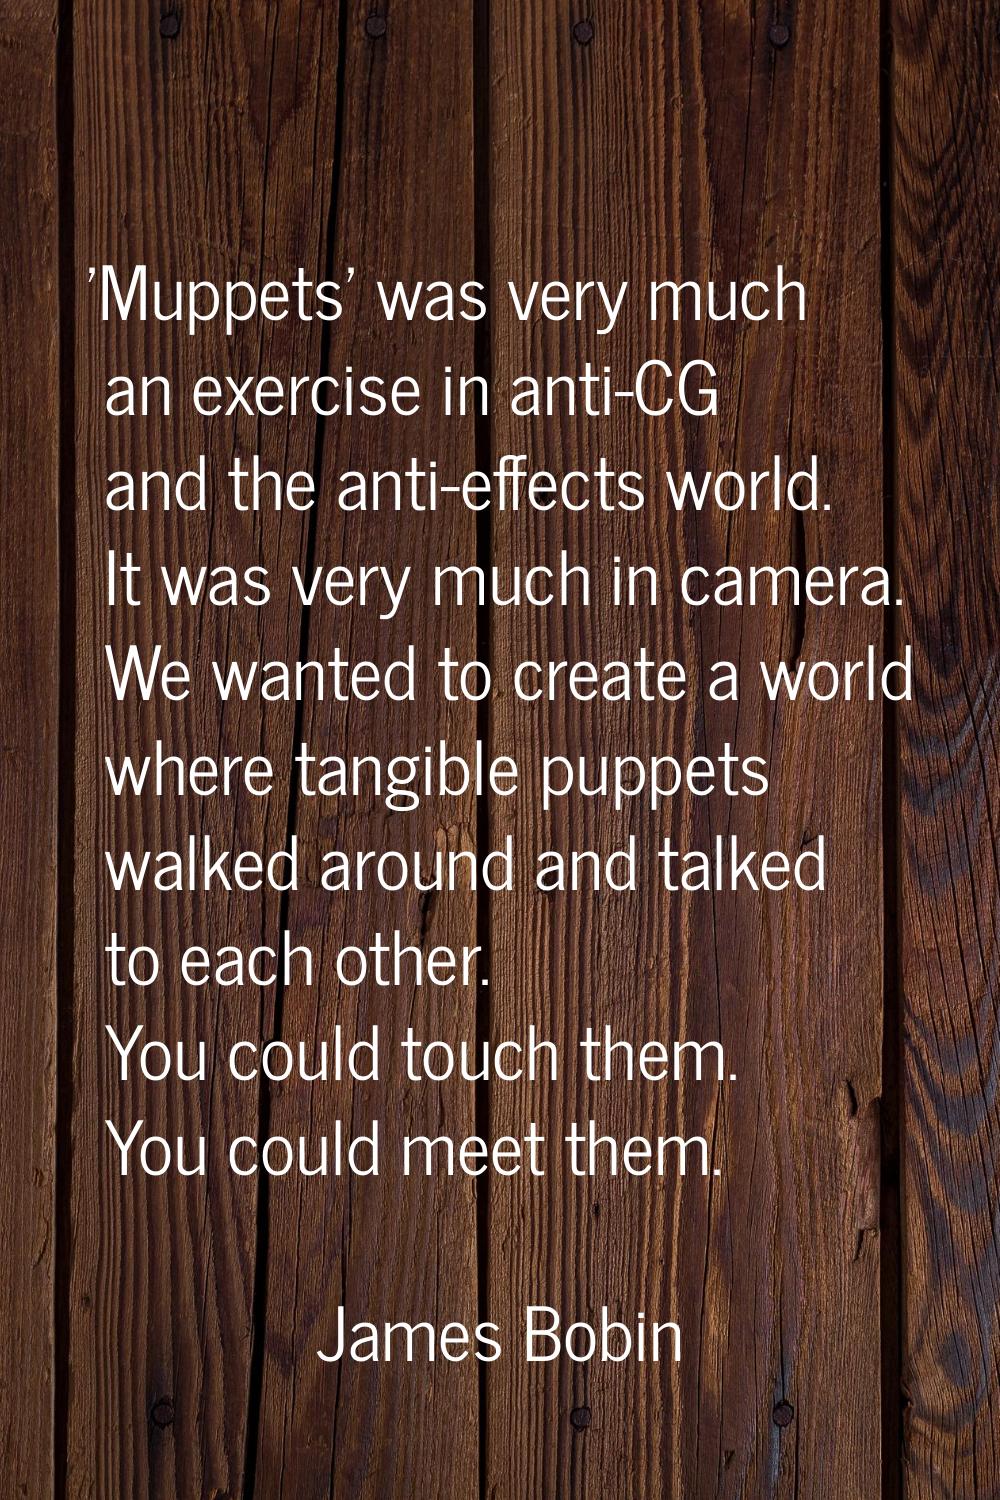 'Muppets' was very much an exercise in anti-CG and the anti-effects world. It was very much in came